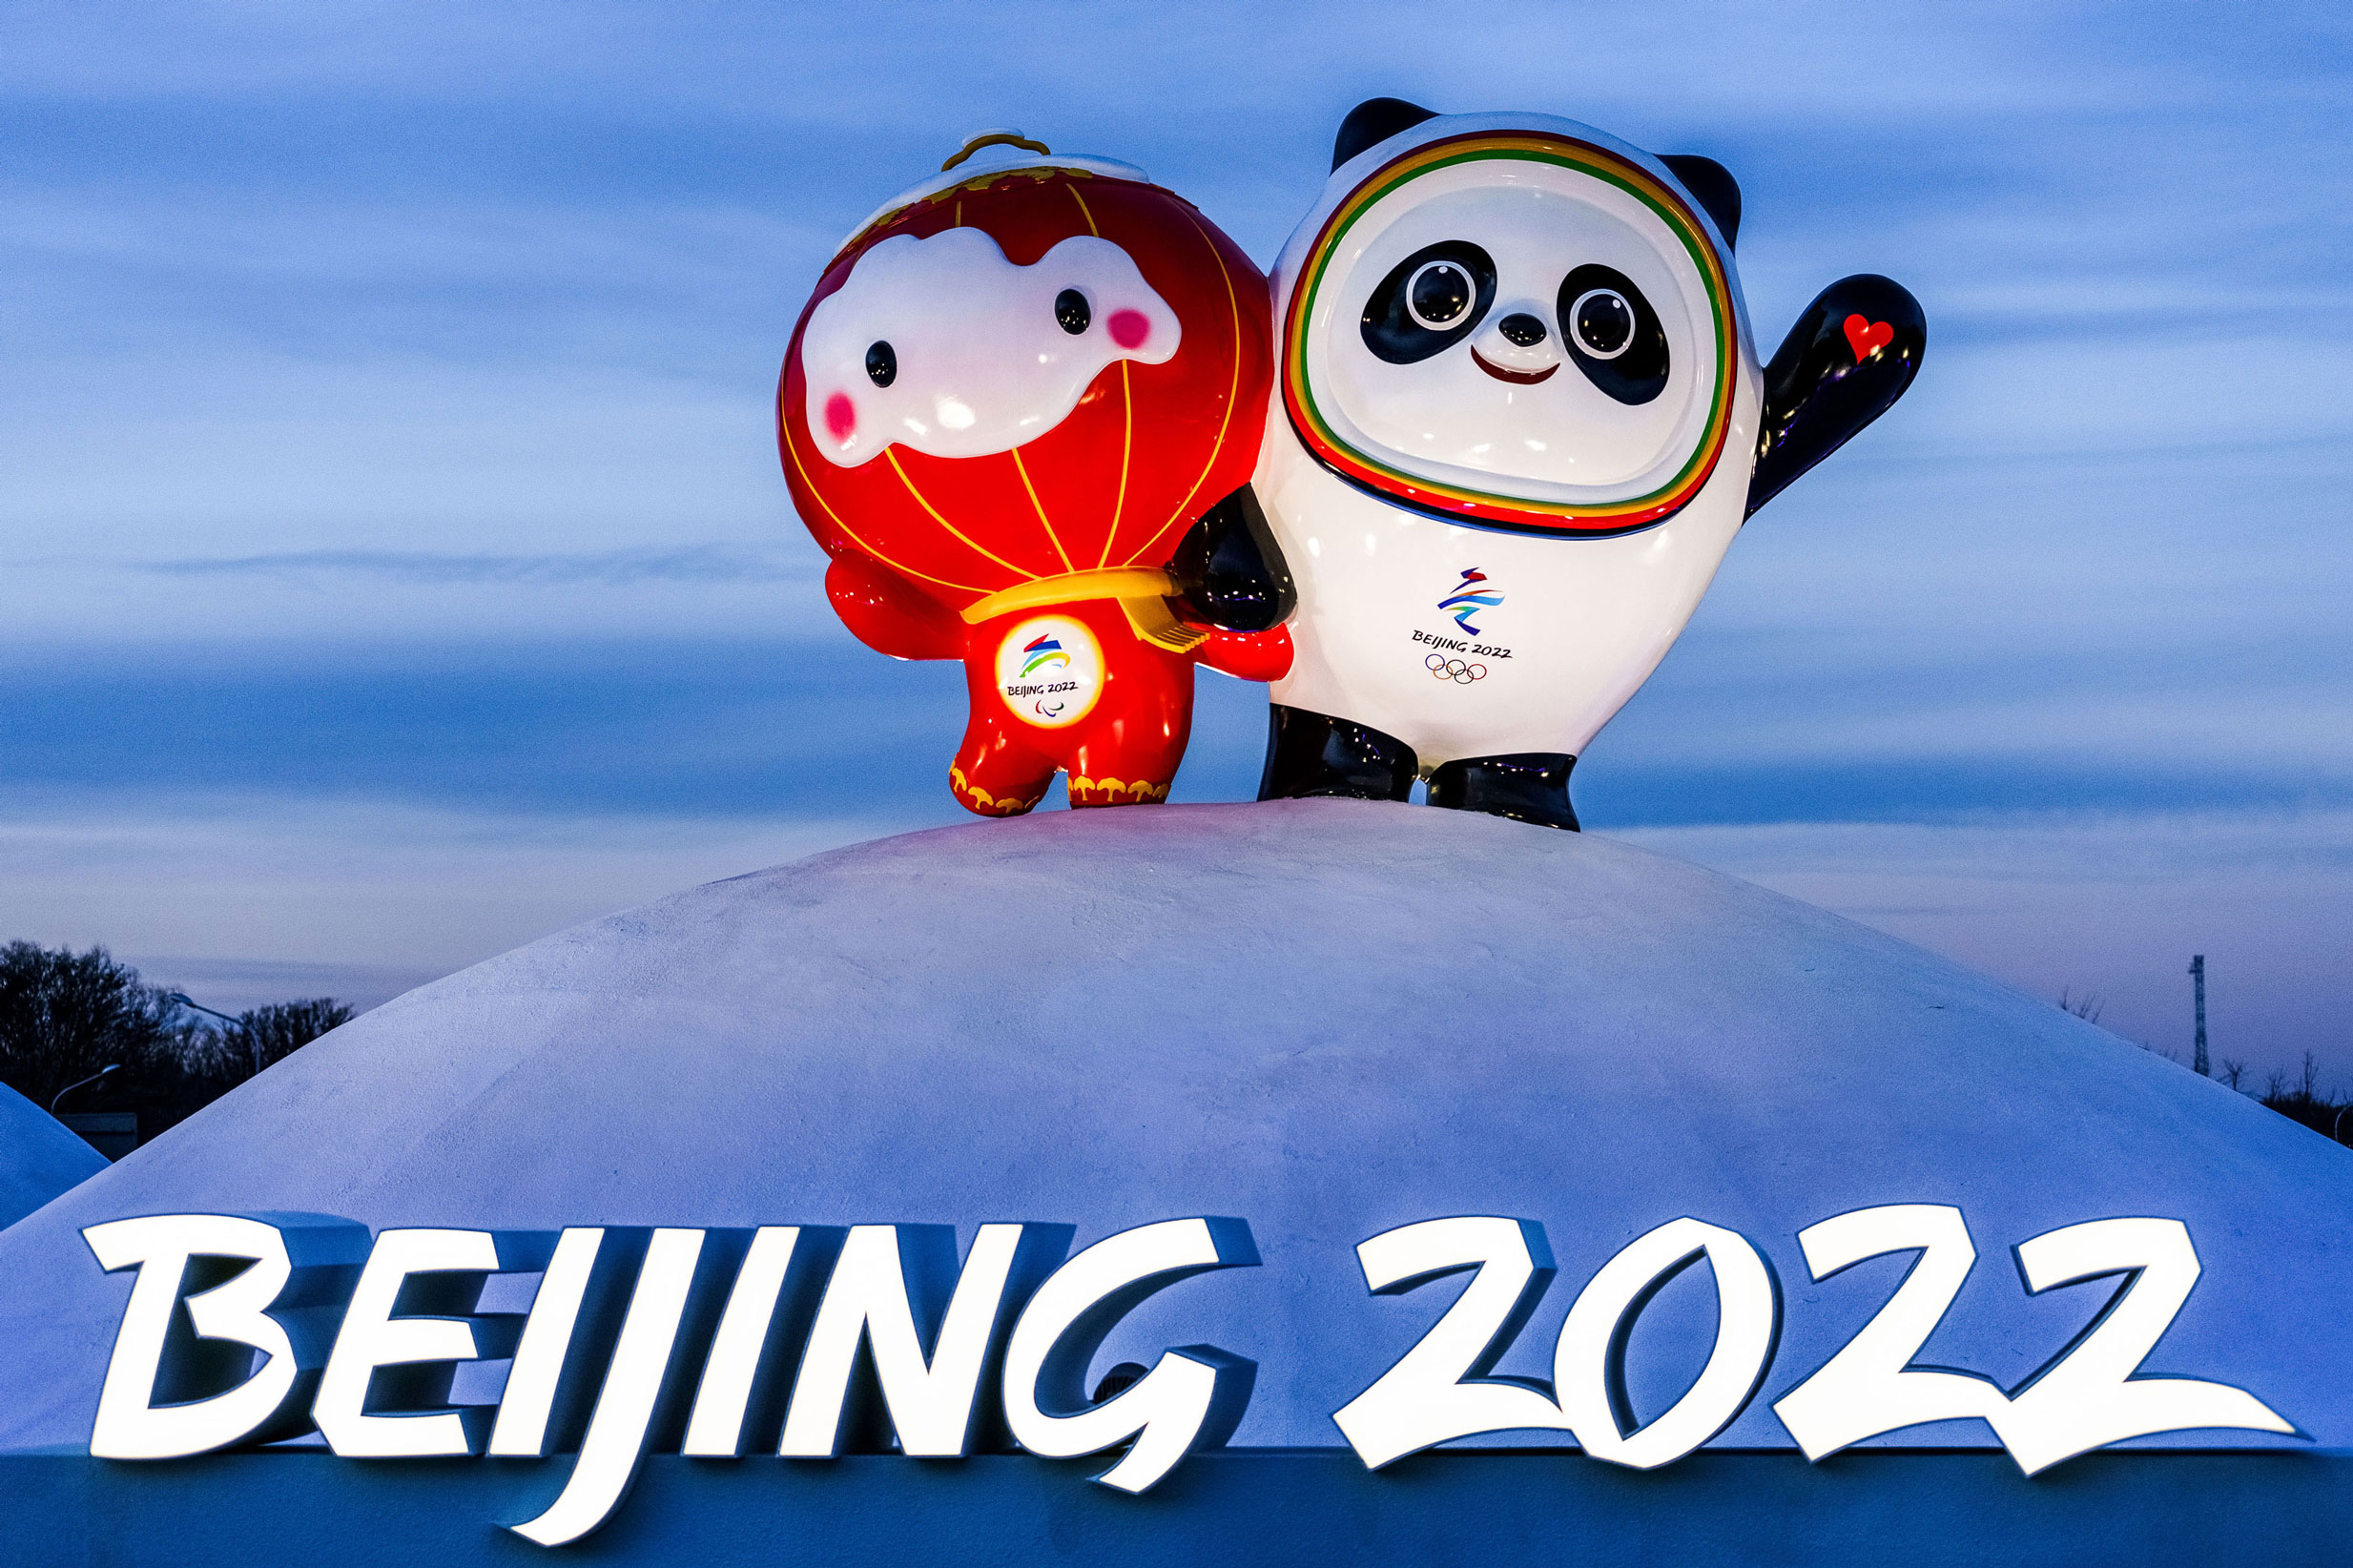 Shuey Rhon Rhon (L), the mascot of the 2022 Winter Paralympics, and Bing Dwen Dwen, the mascot of the 2022 Winter Olympics, are pictured in the Olympic Village in Beijing on January 27.